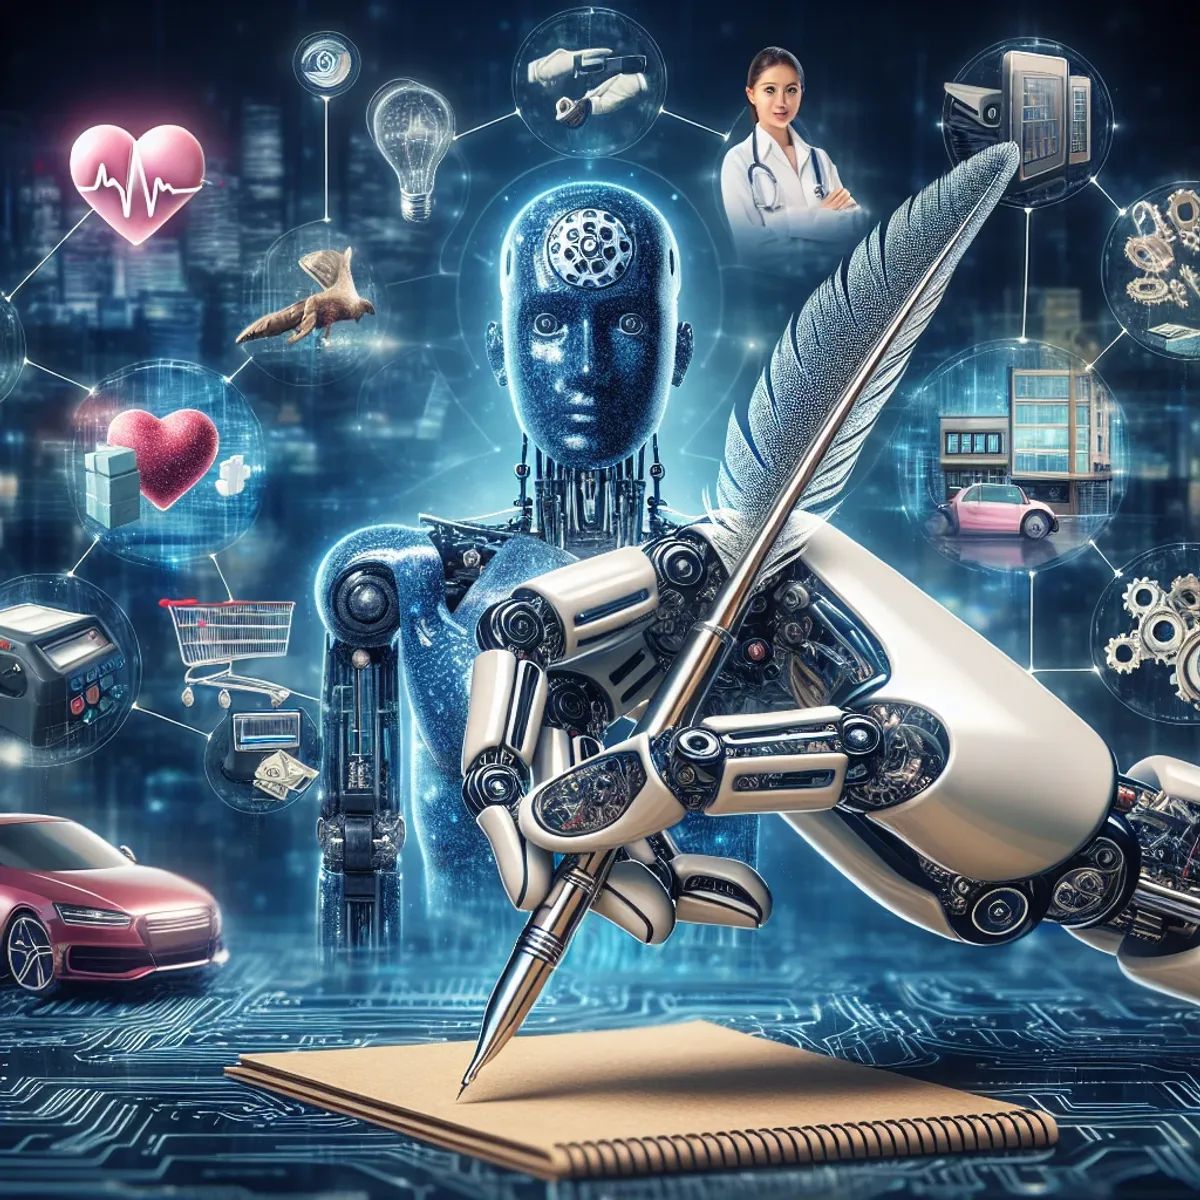 A robotic hand delicately holds a quill pen in the foreground, while various industry symbols such as a stethoscope, shopping cart, and self-driving car are shown in the background.